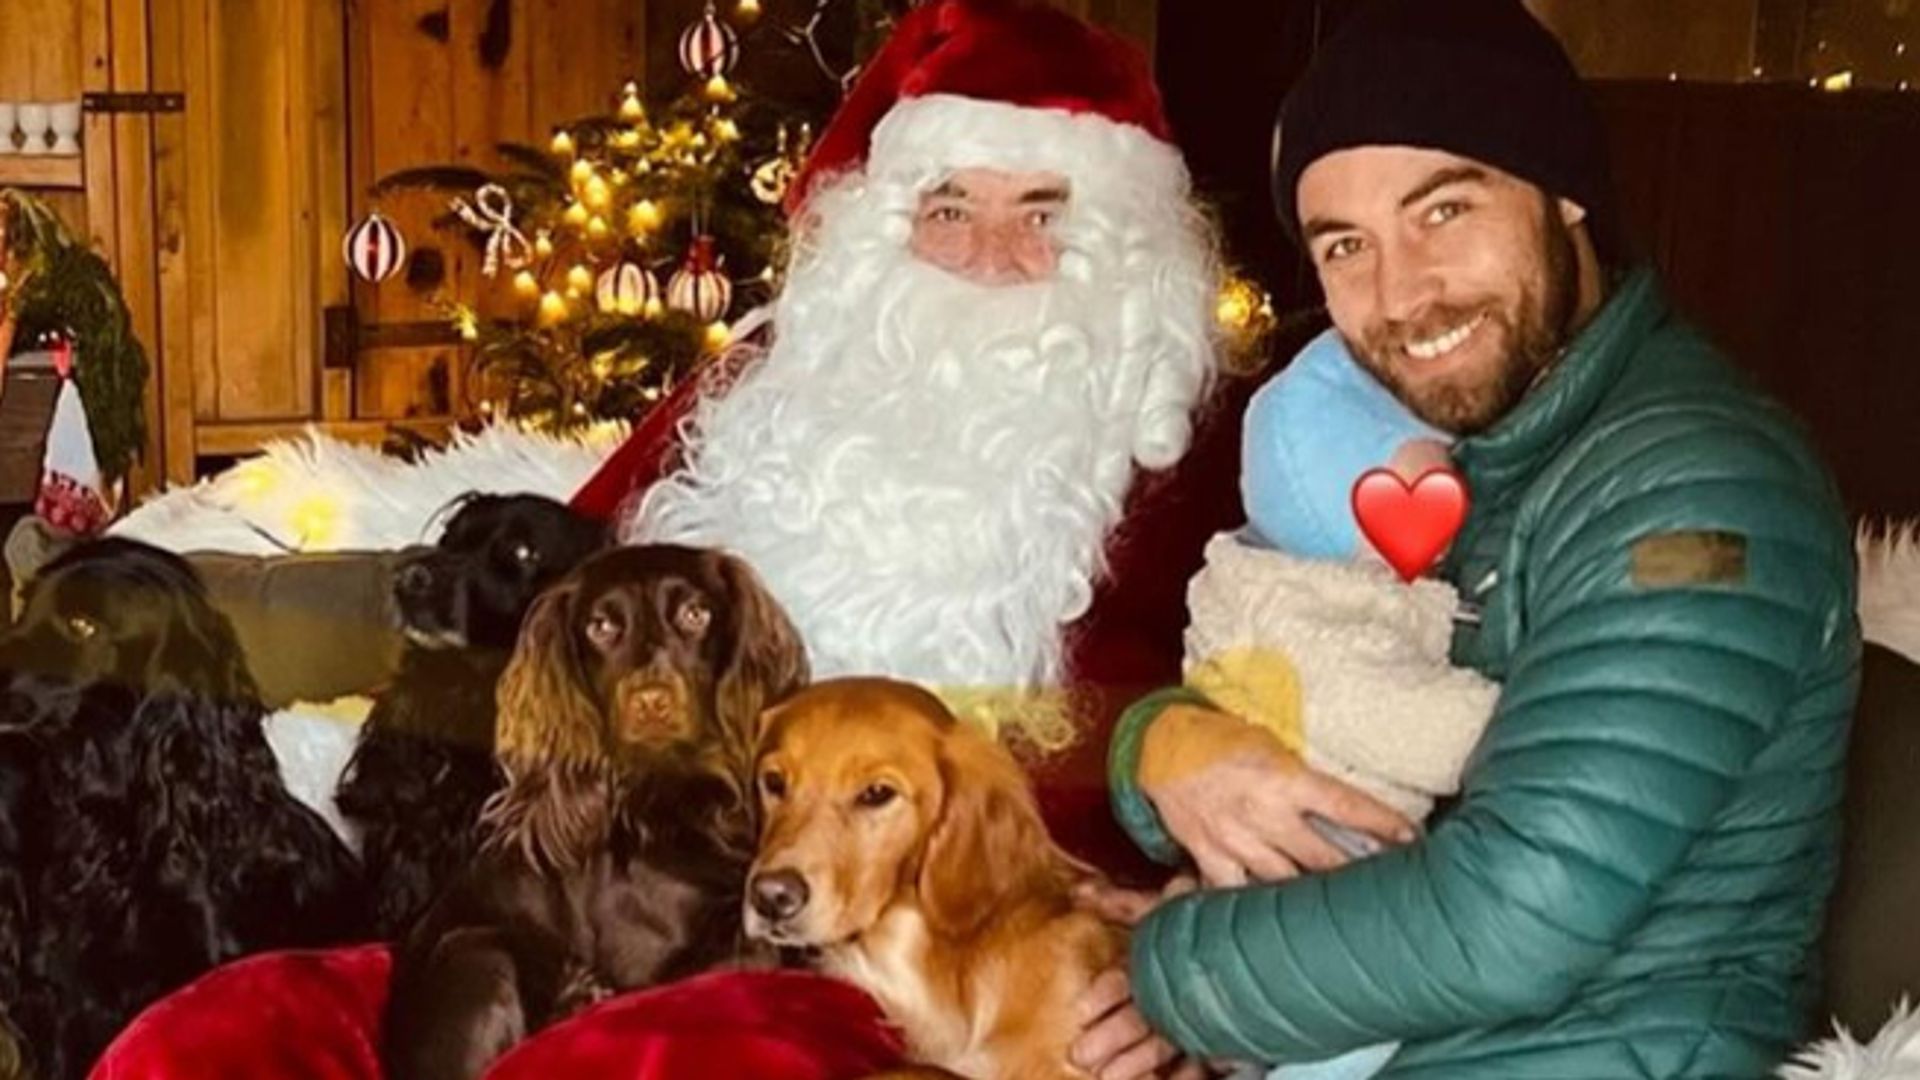 James Middleton and his son Inigo and the family dogs with Santa Claus